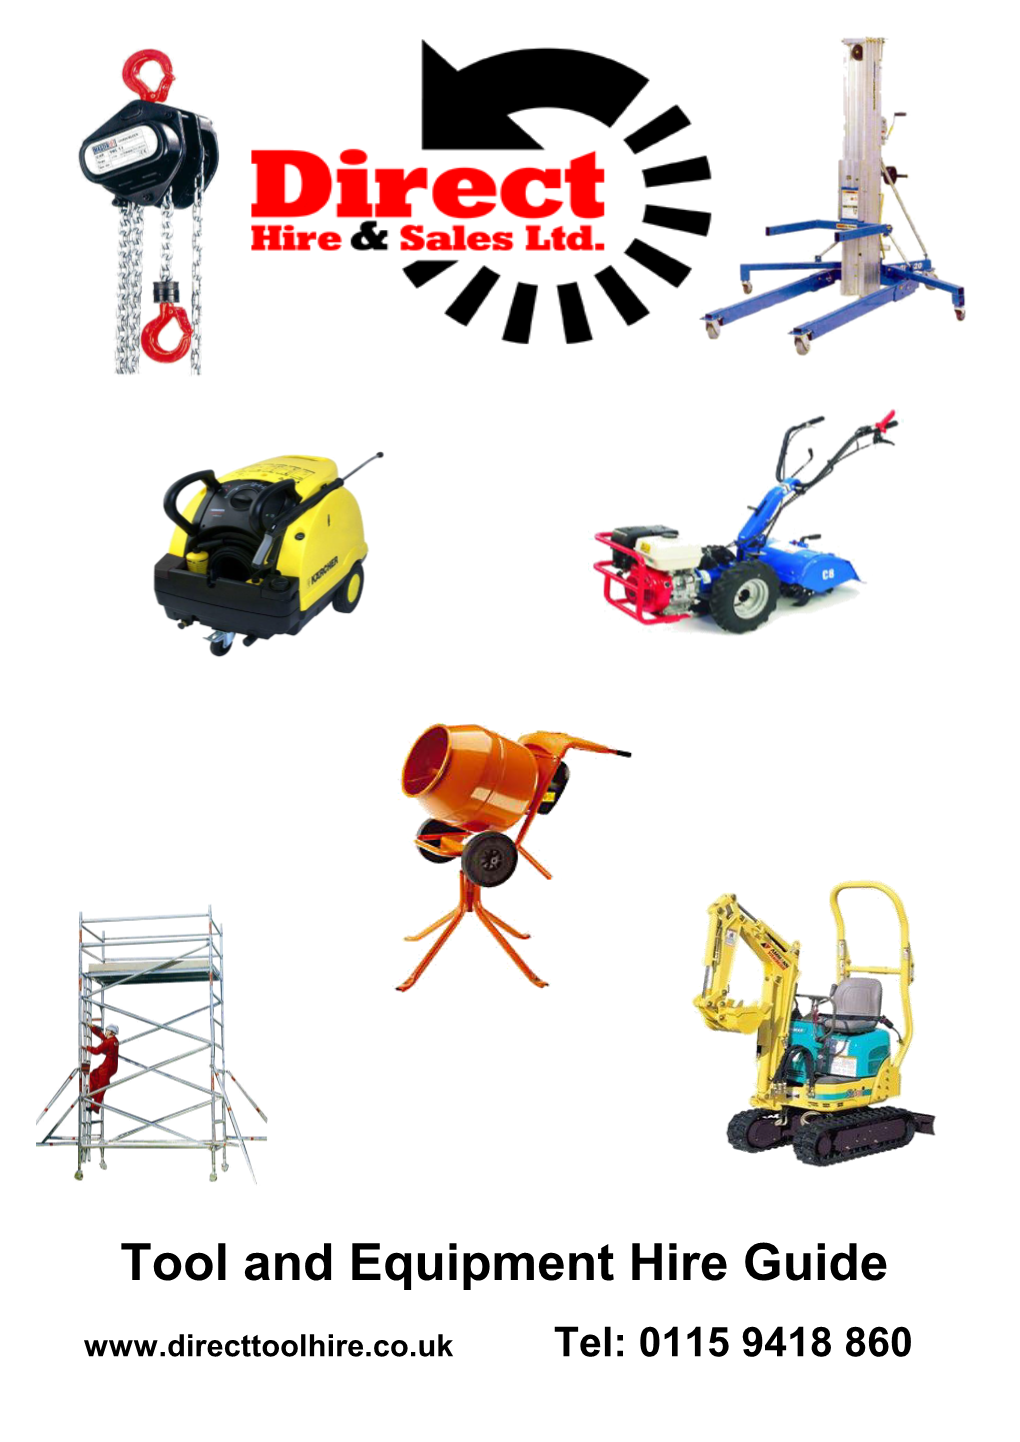 Tool and Equipment Hire Guide Tel: 0115 9418 860 Contents